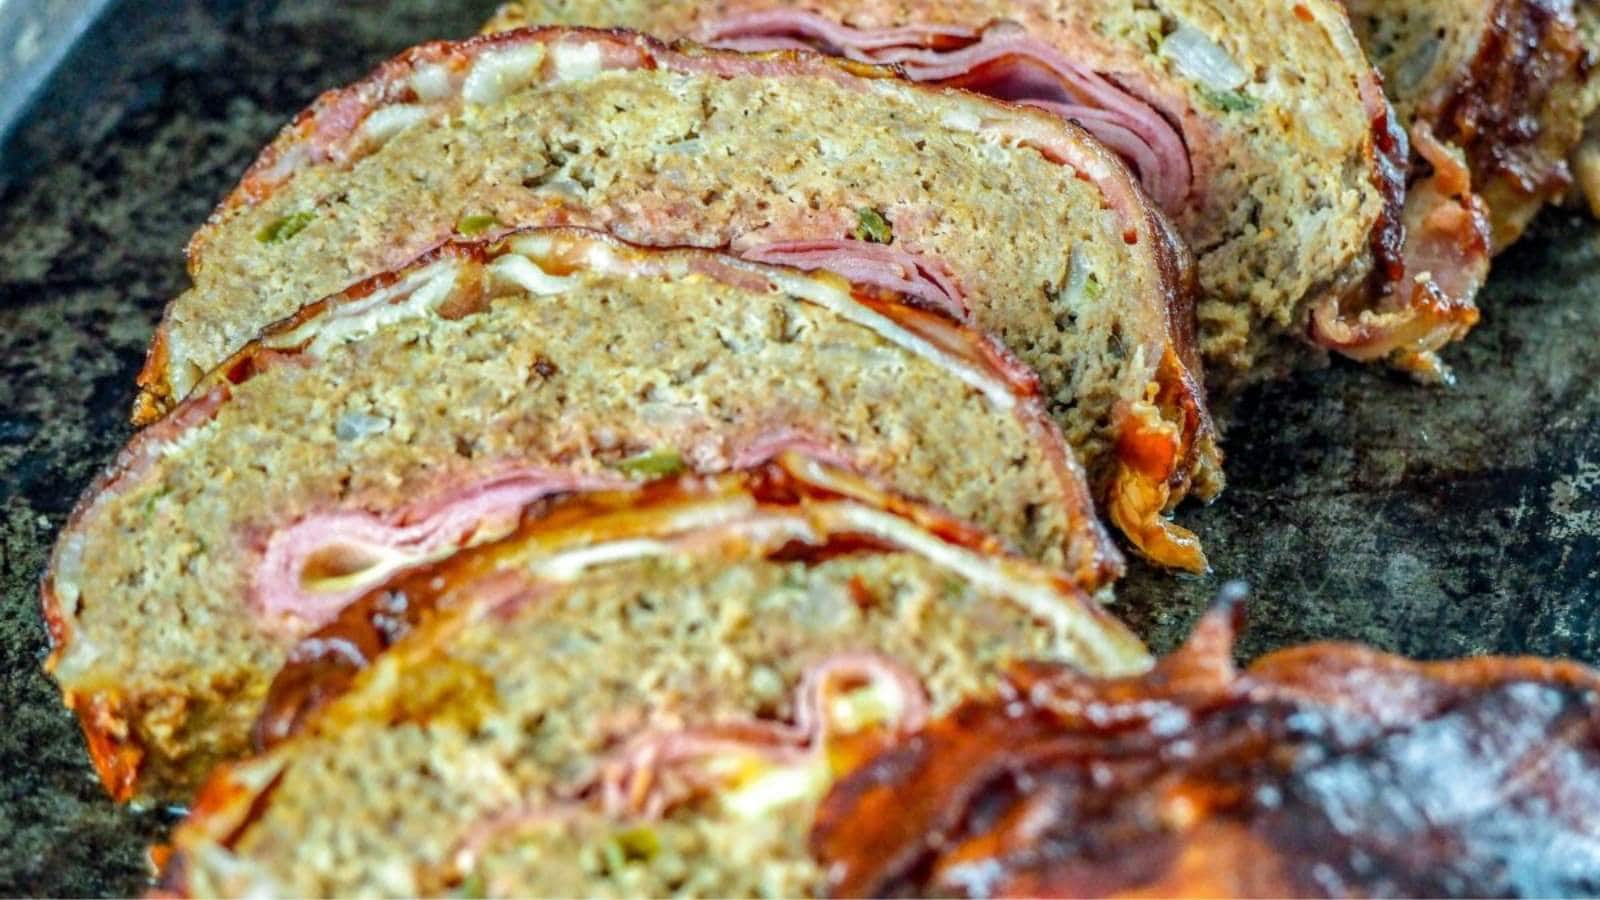 Bacon Bbq Stuffed Meatloaf recipe by Monday Is Meatloaf.